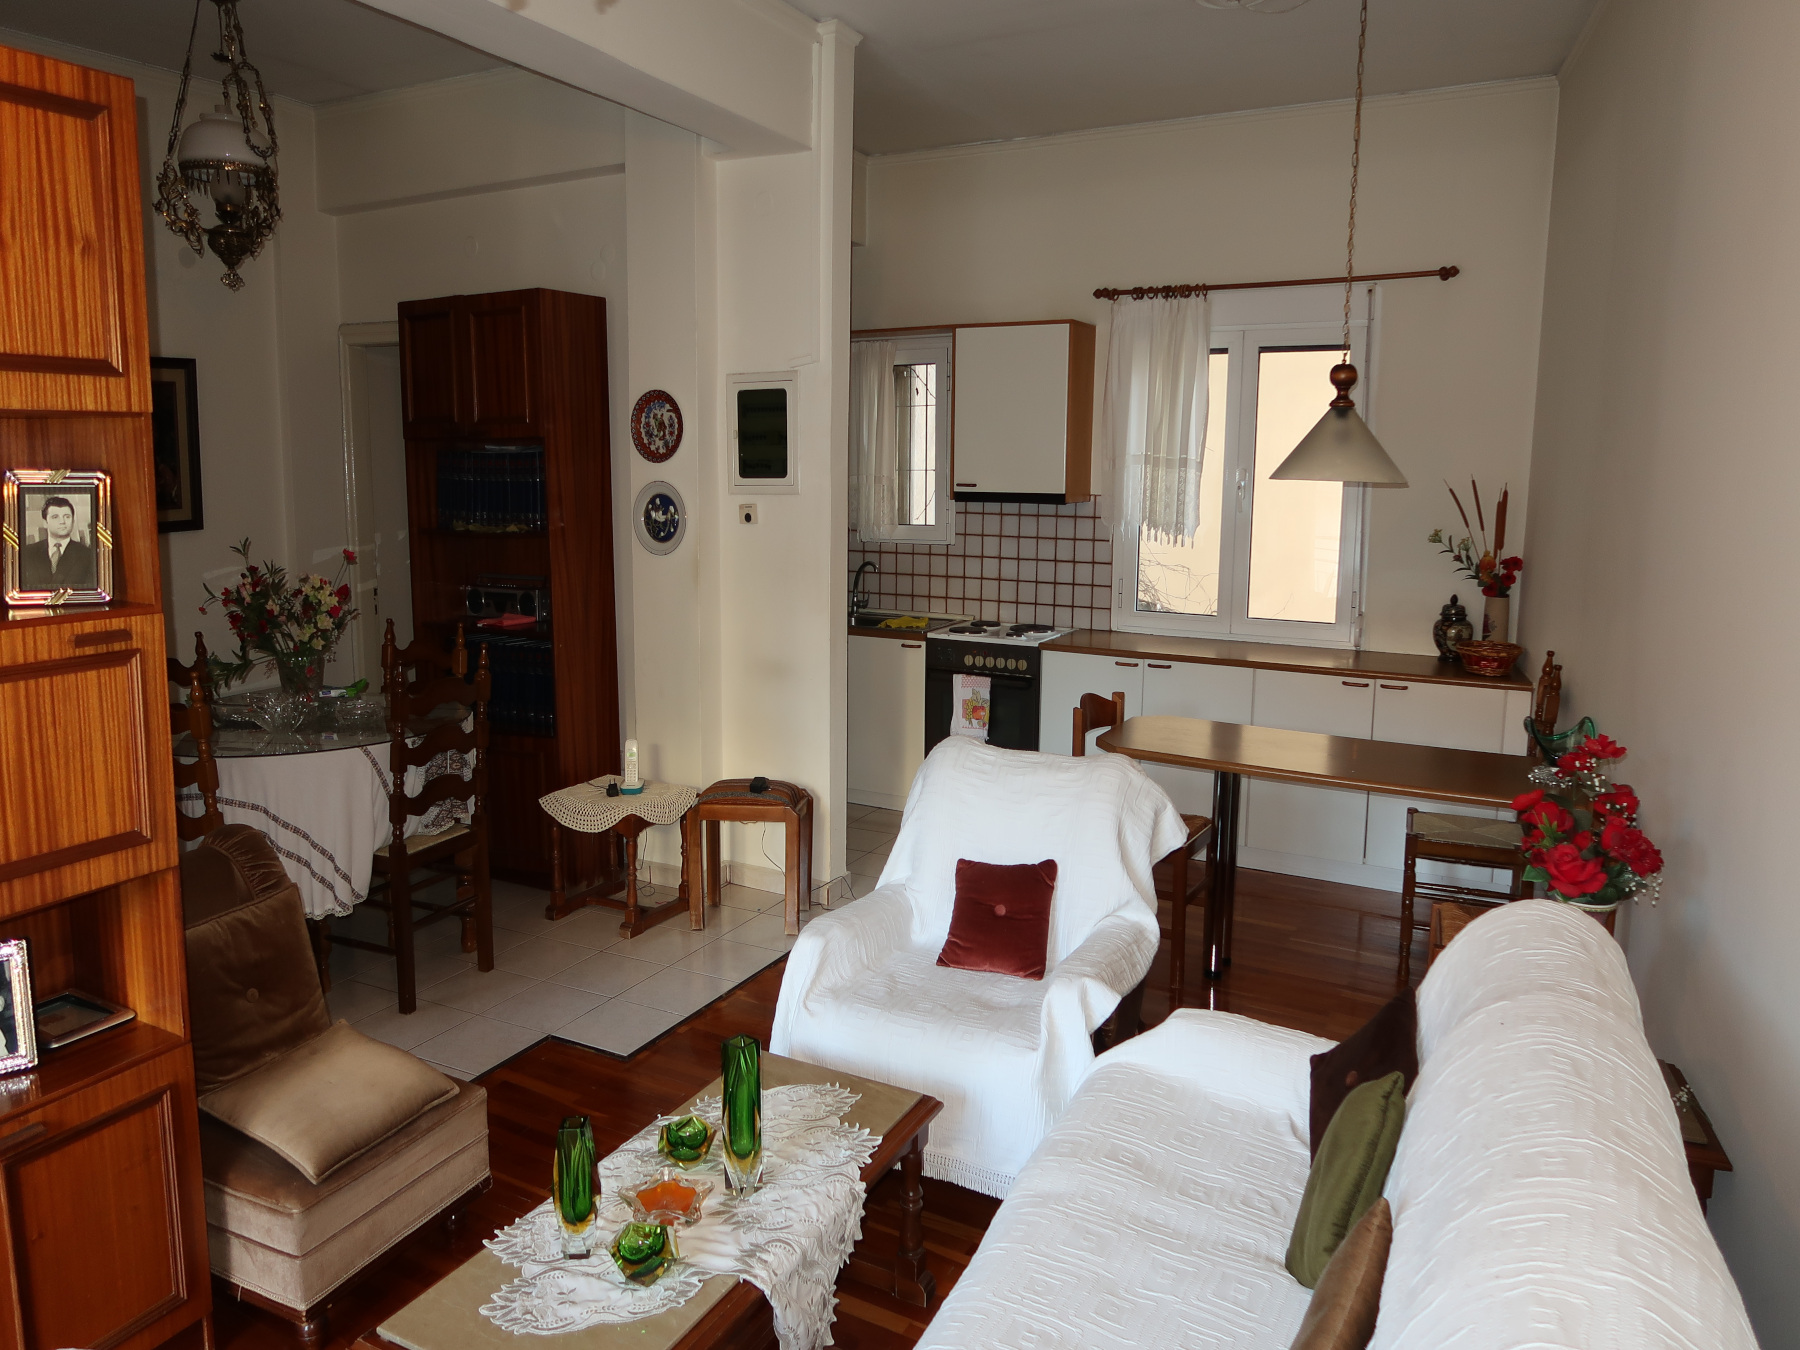 For sale 4-room apartment 90 sq.m. 1st floor in the area of Alsos in Ioannina